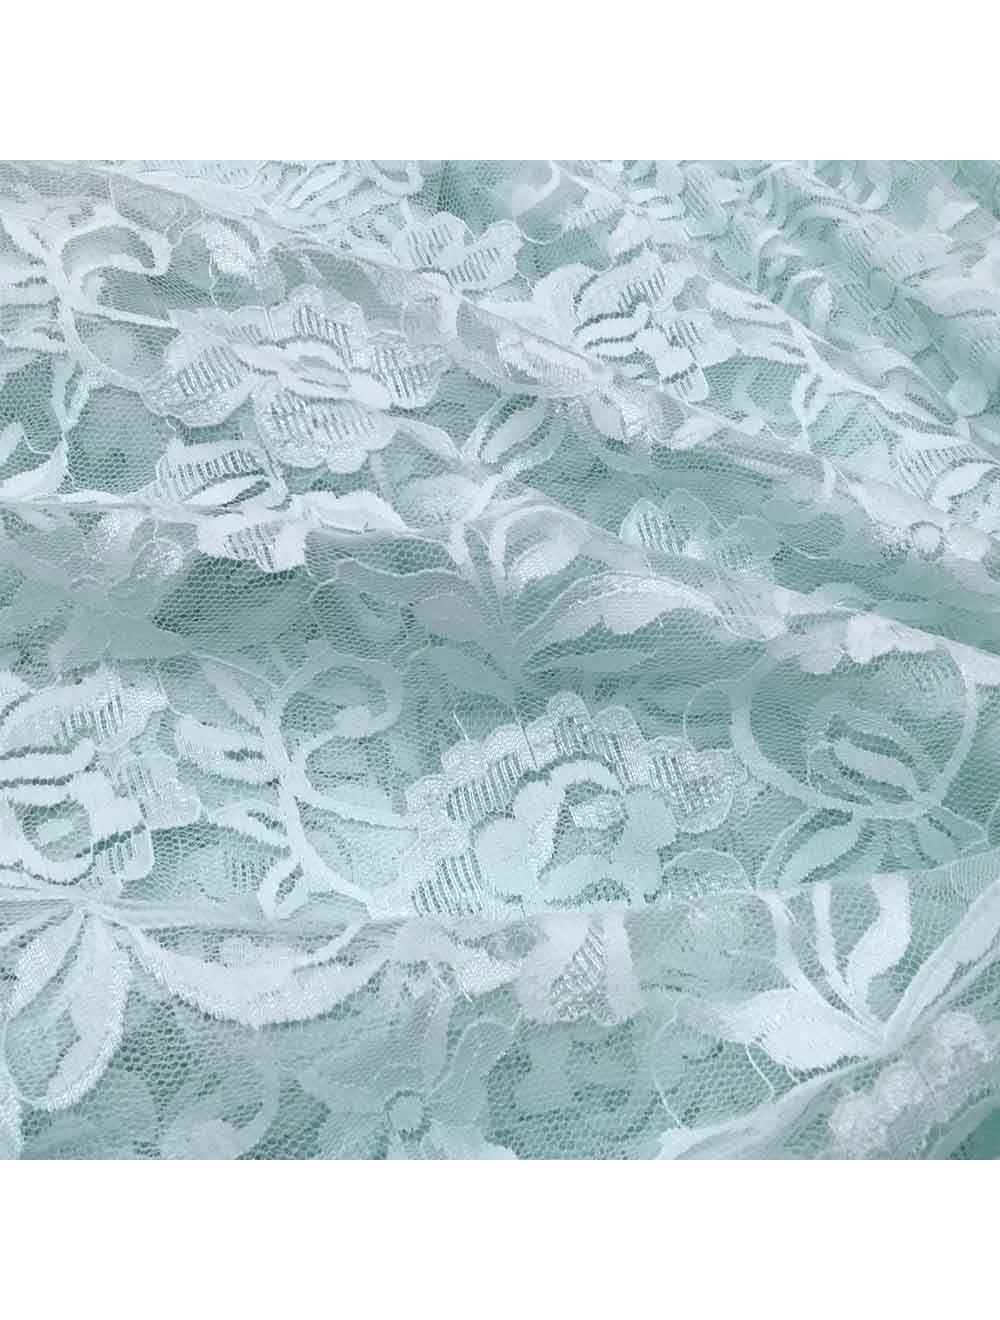 Sea Green Net Lace Fabric 54 Inches Width